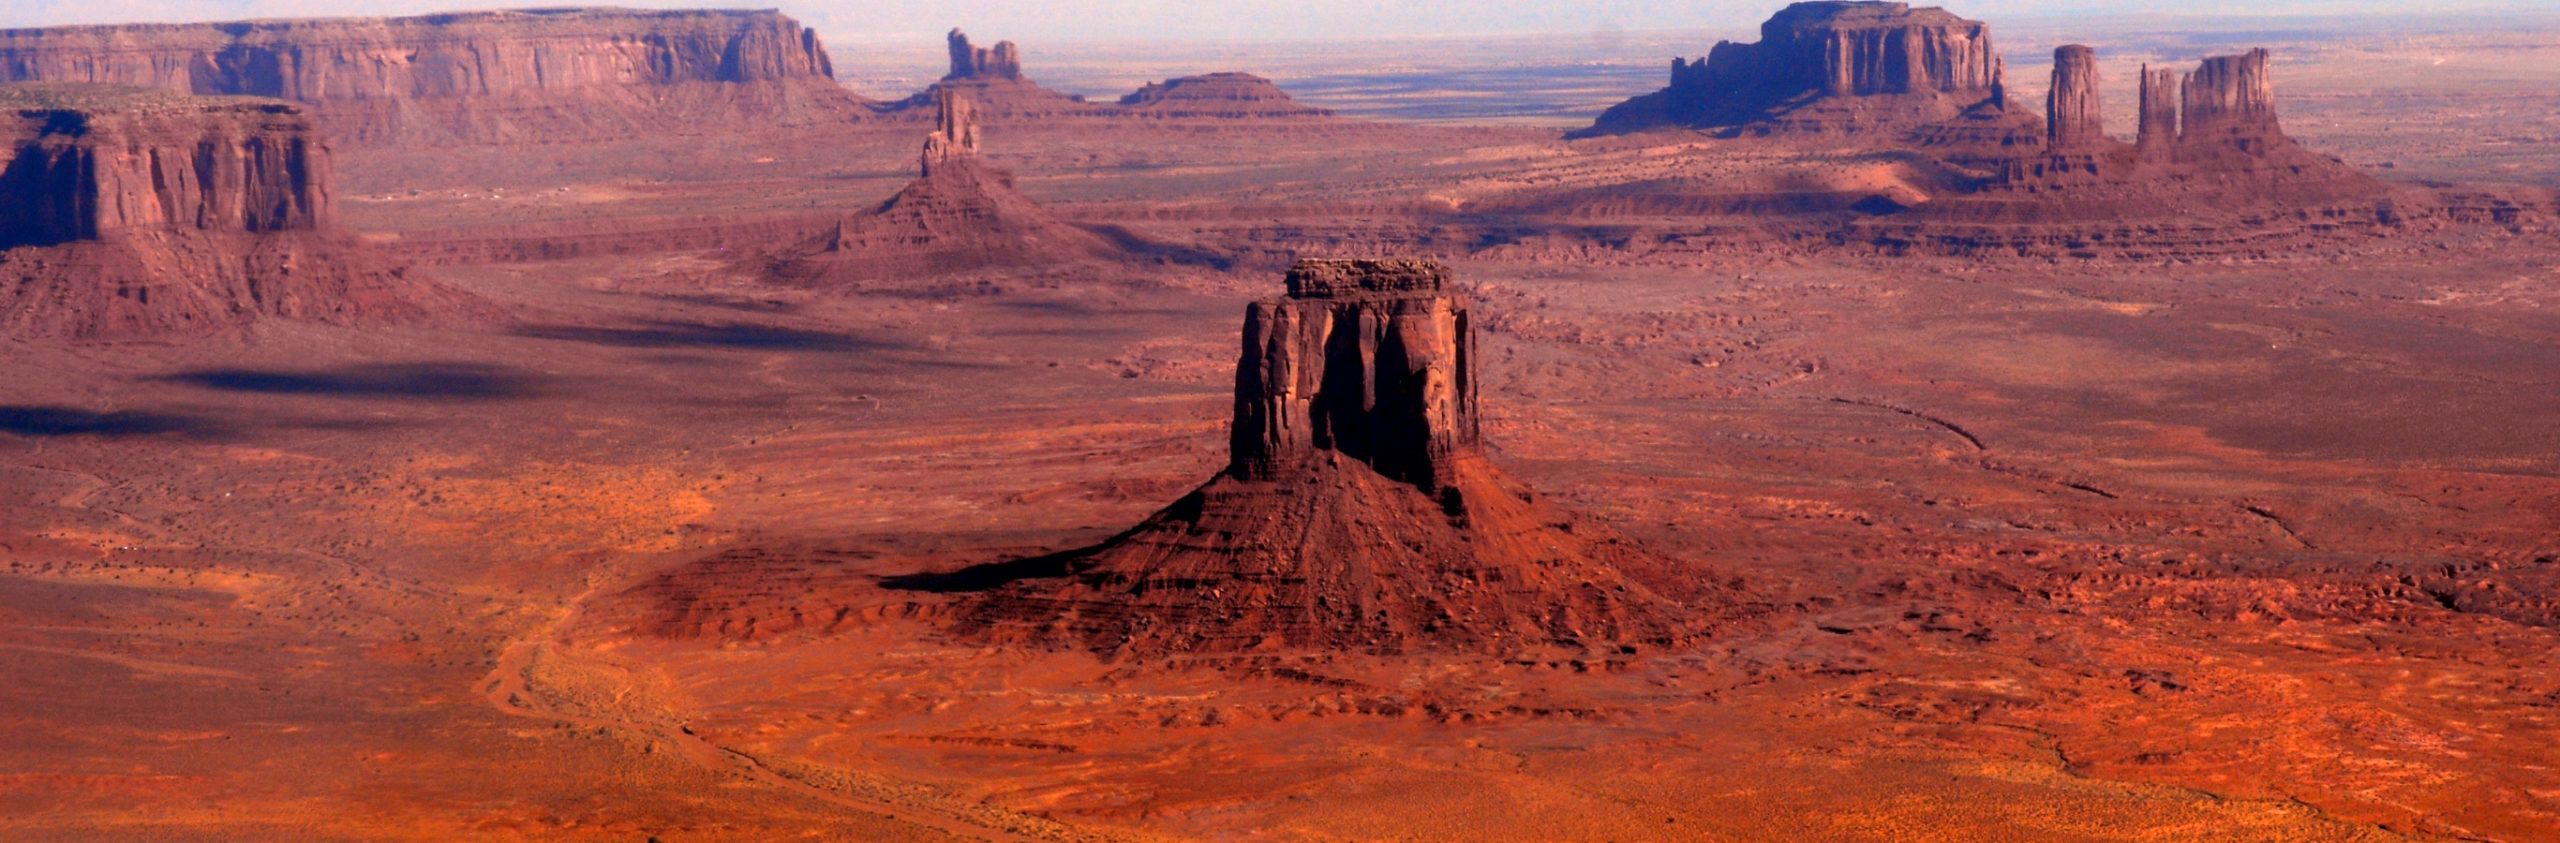 Sweeping view of Monument Valley from the sky